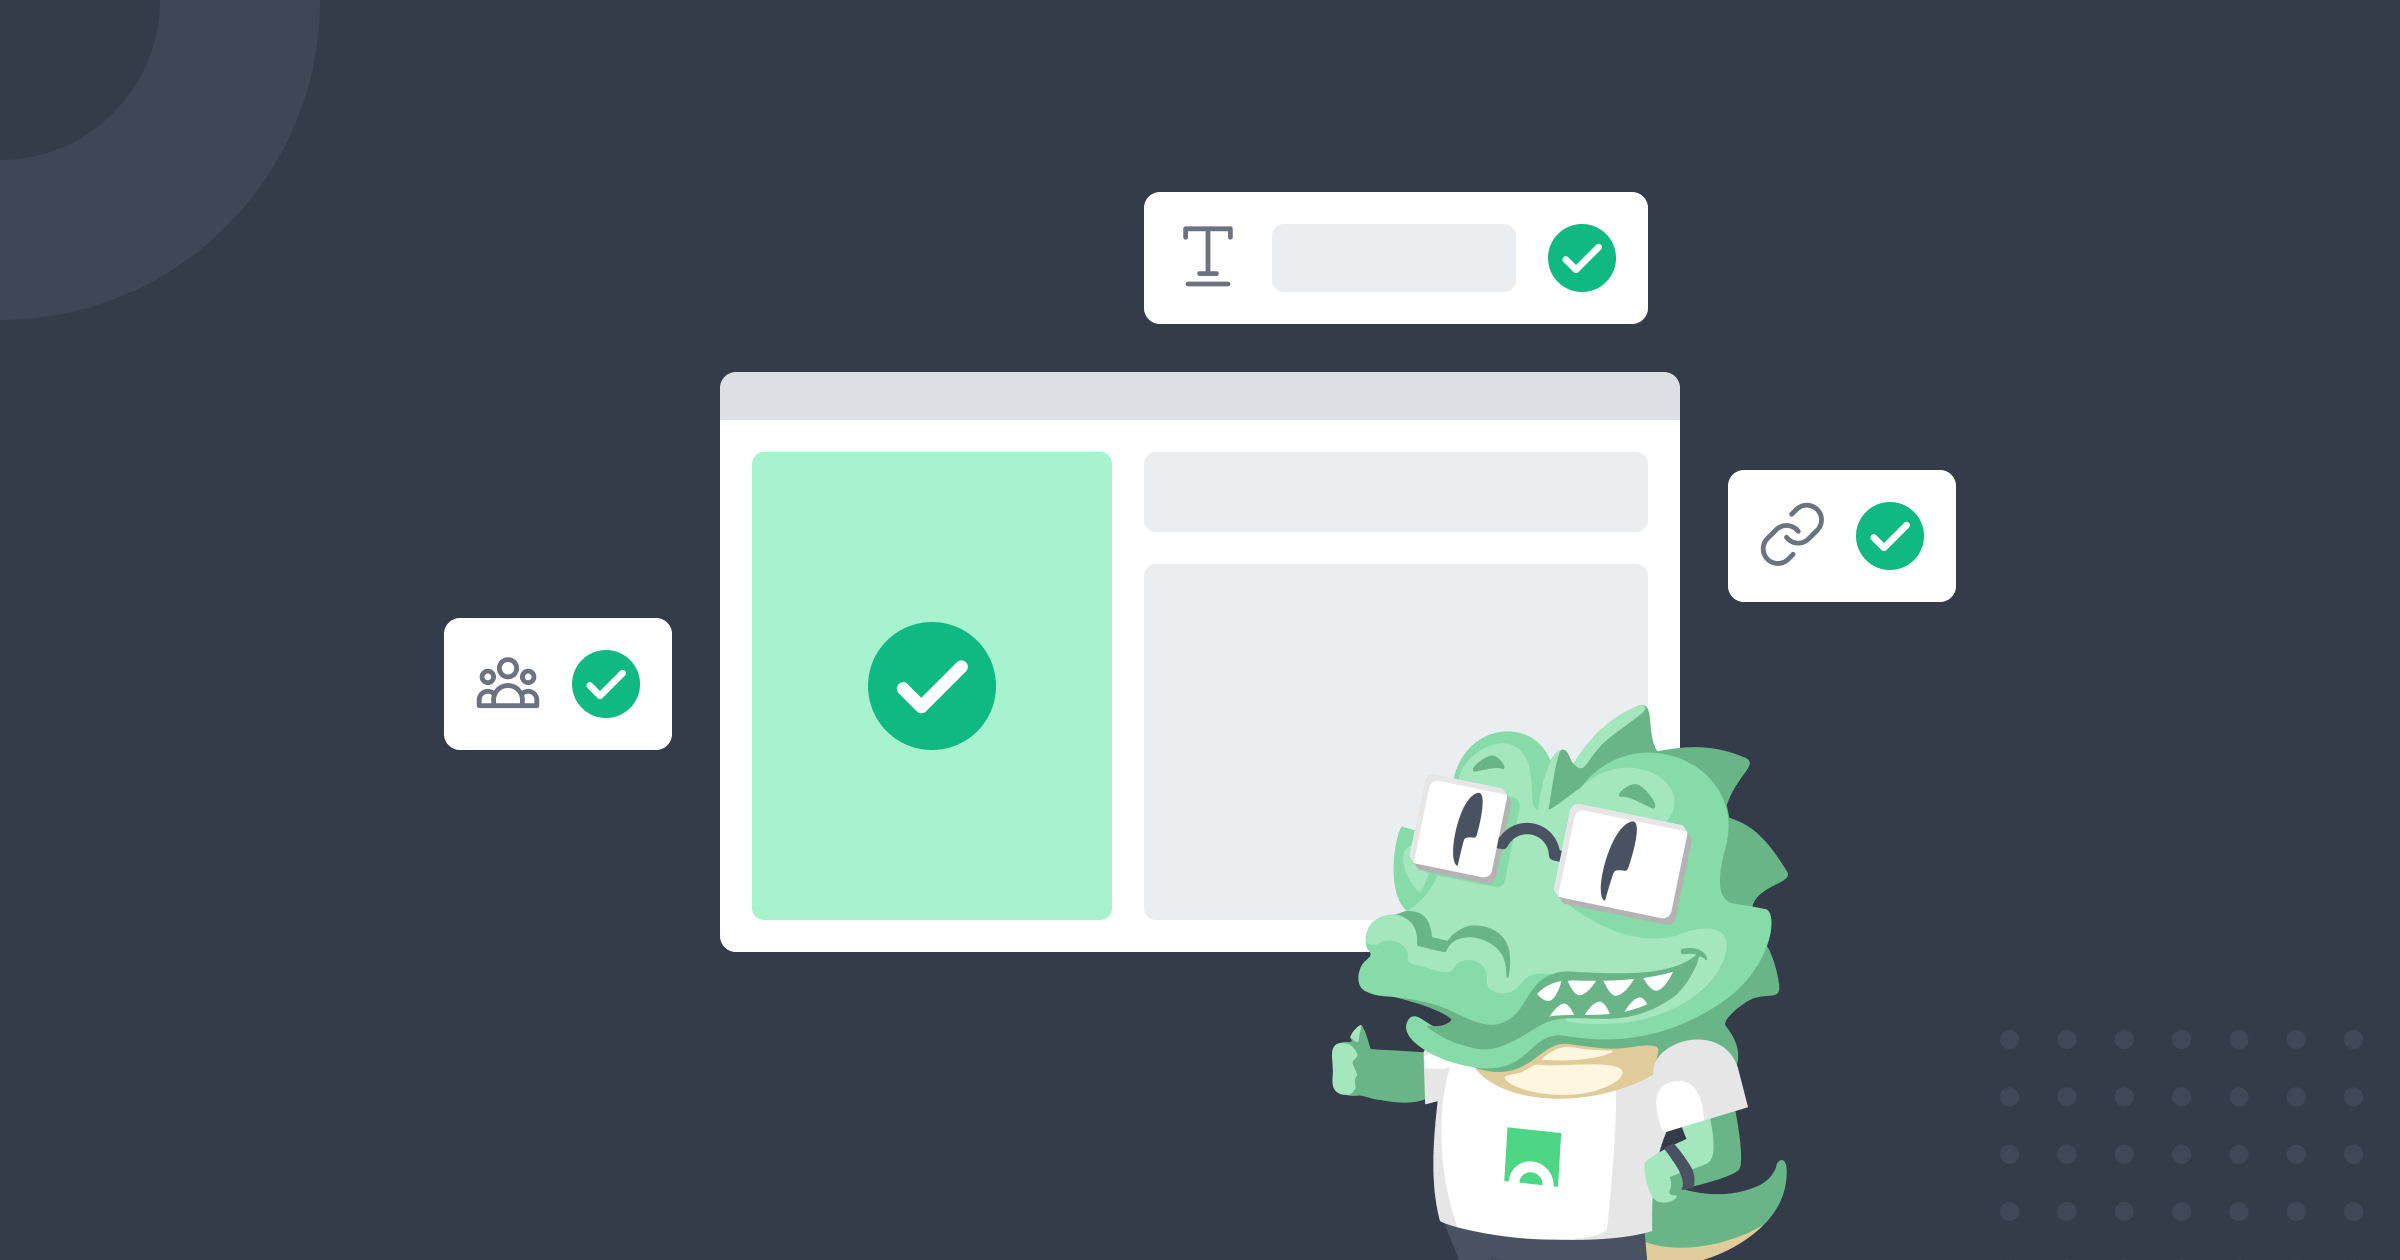 Croct mascot in front of a website wireframe and its main elements with green checkmarks.